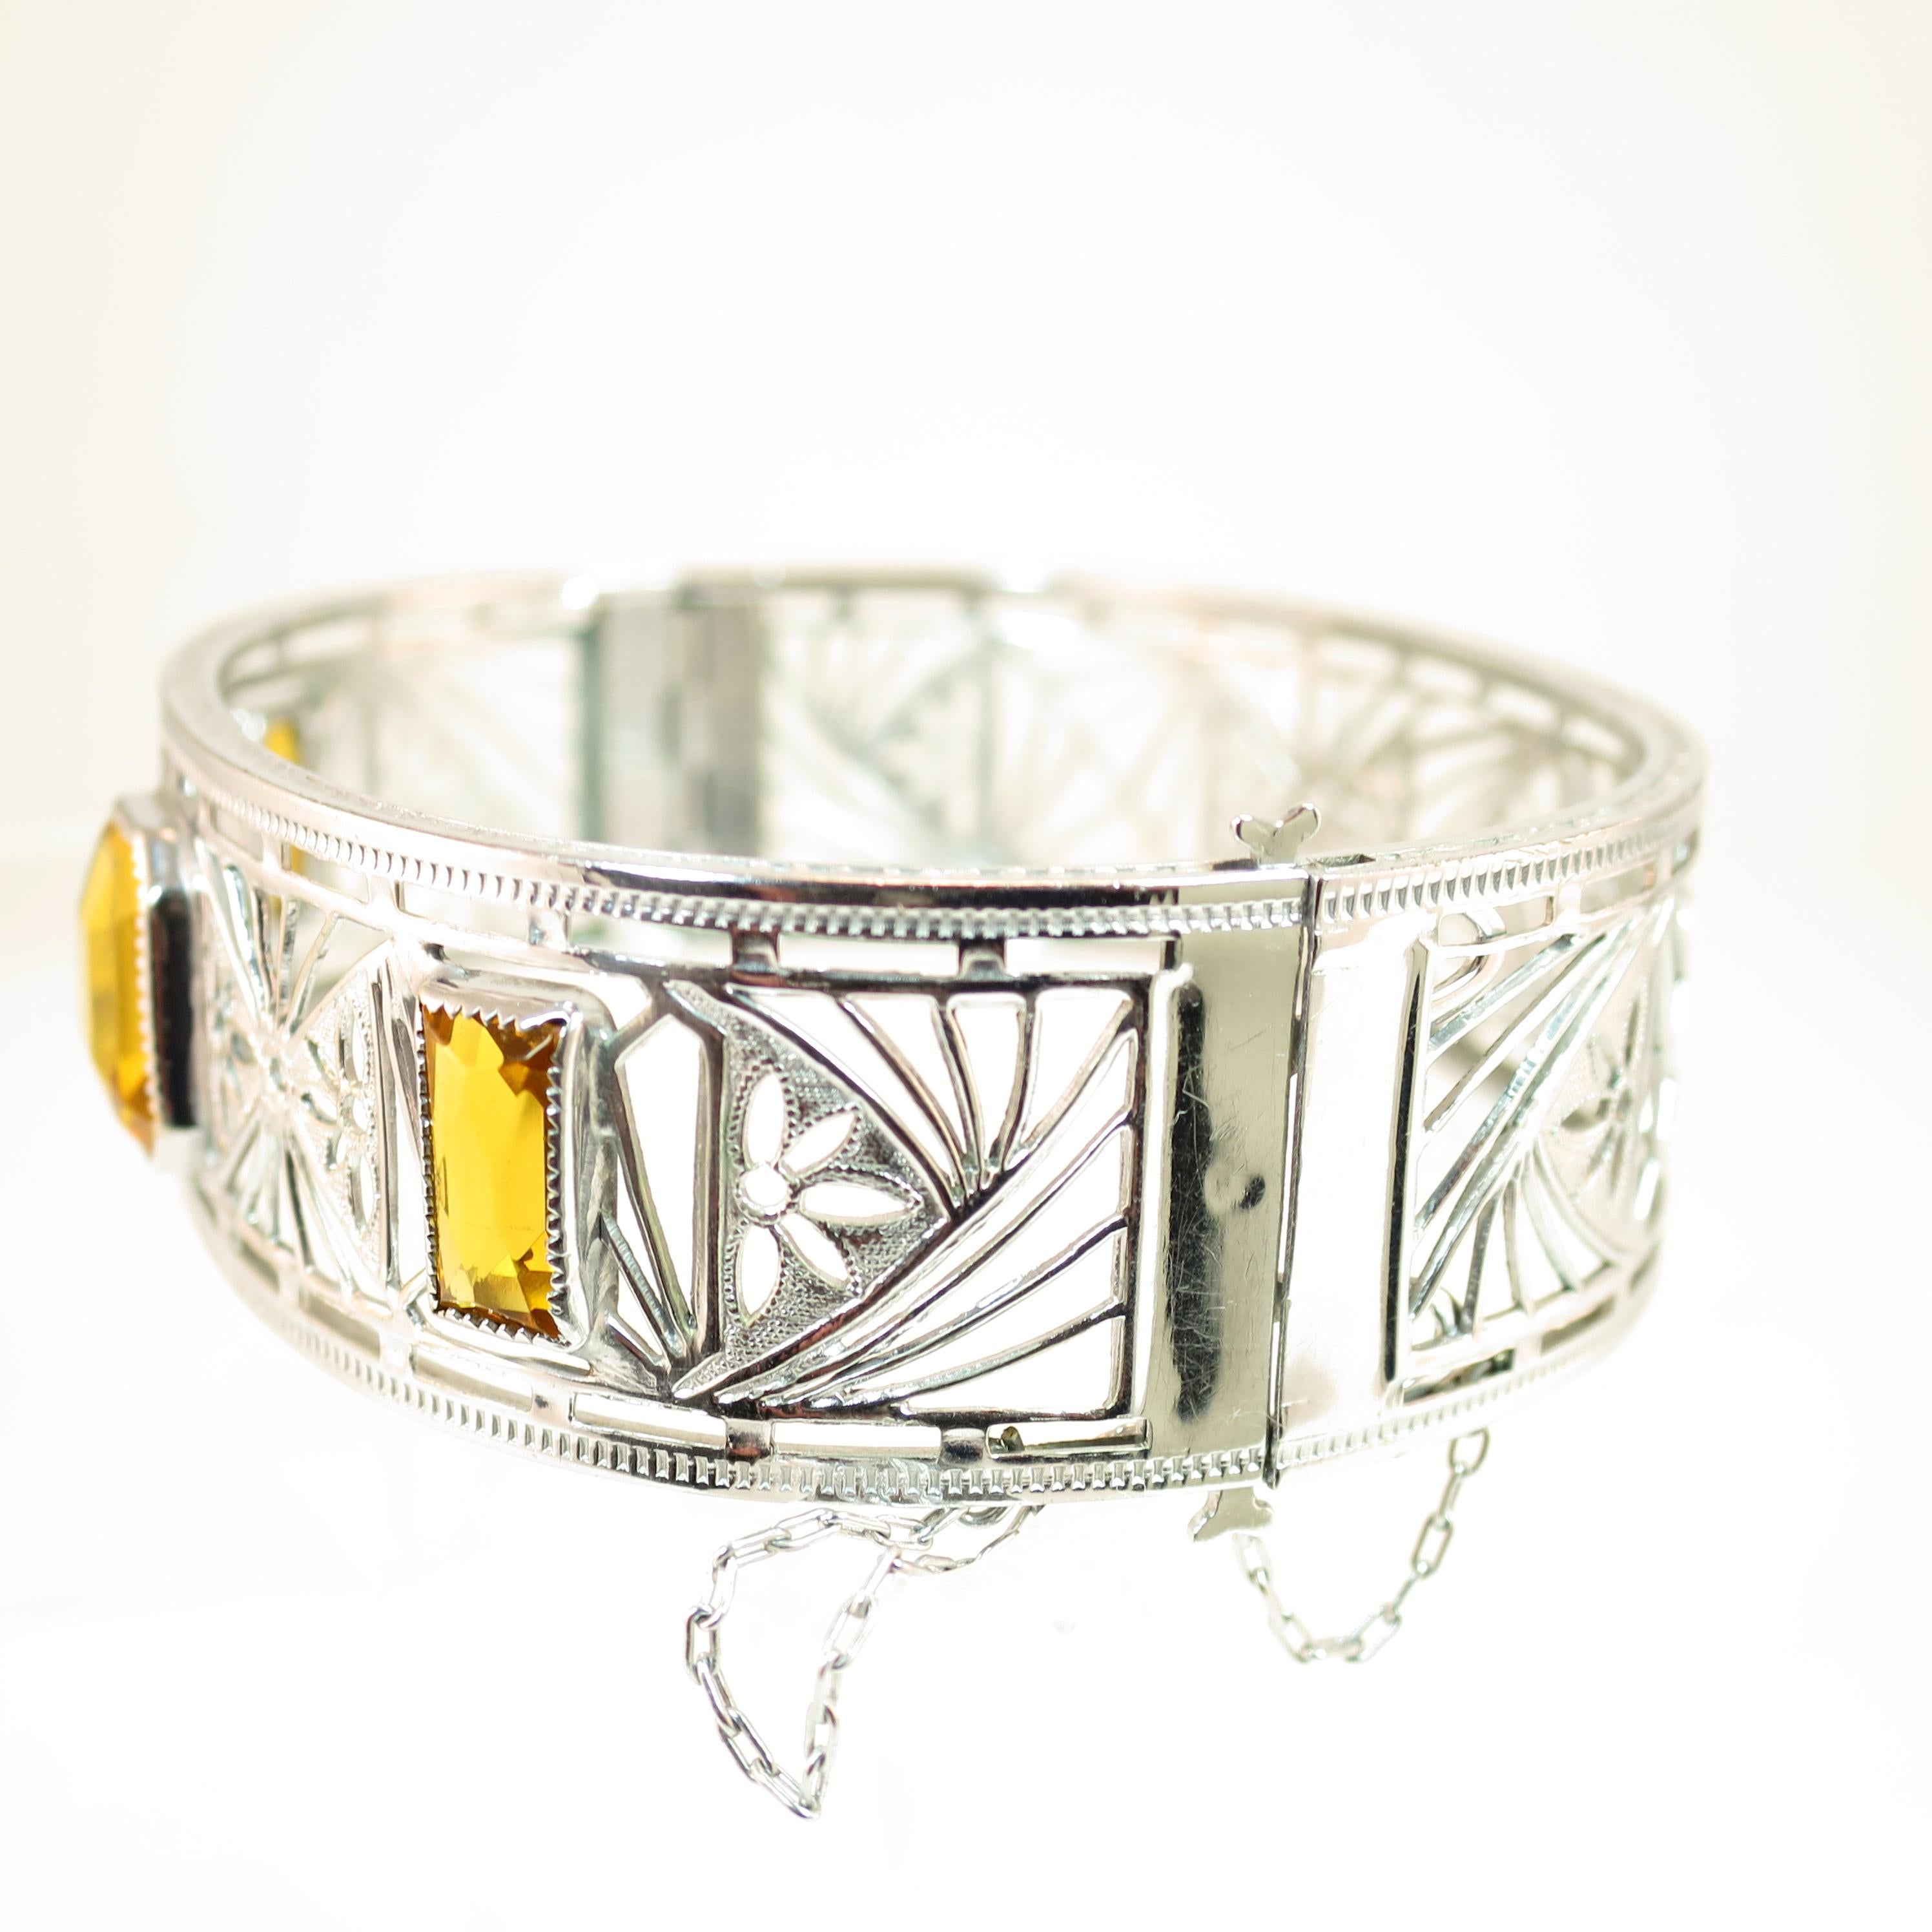 Offered here is an Art Deco Nu-Wite rhodium-plated hinged cuff bracelet created by the Ripley & Gowan Co. of Attleboro, MA in the 1920s. The overall shape is a slightly flattened oval; the wide band is decorated in a delicate spiderweb filigree with